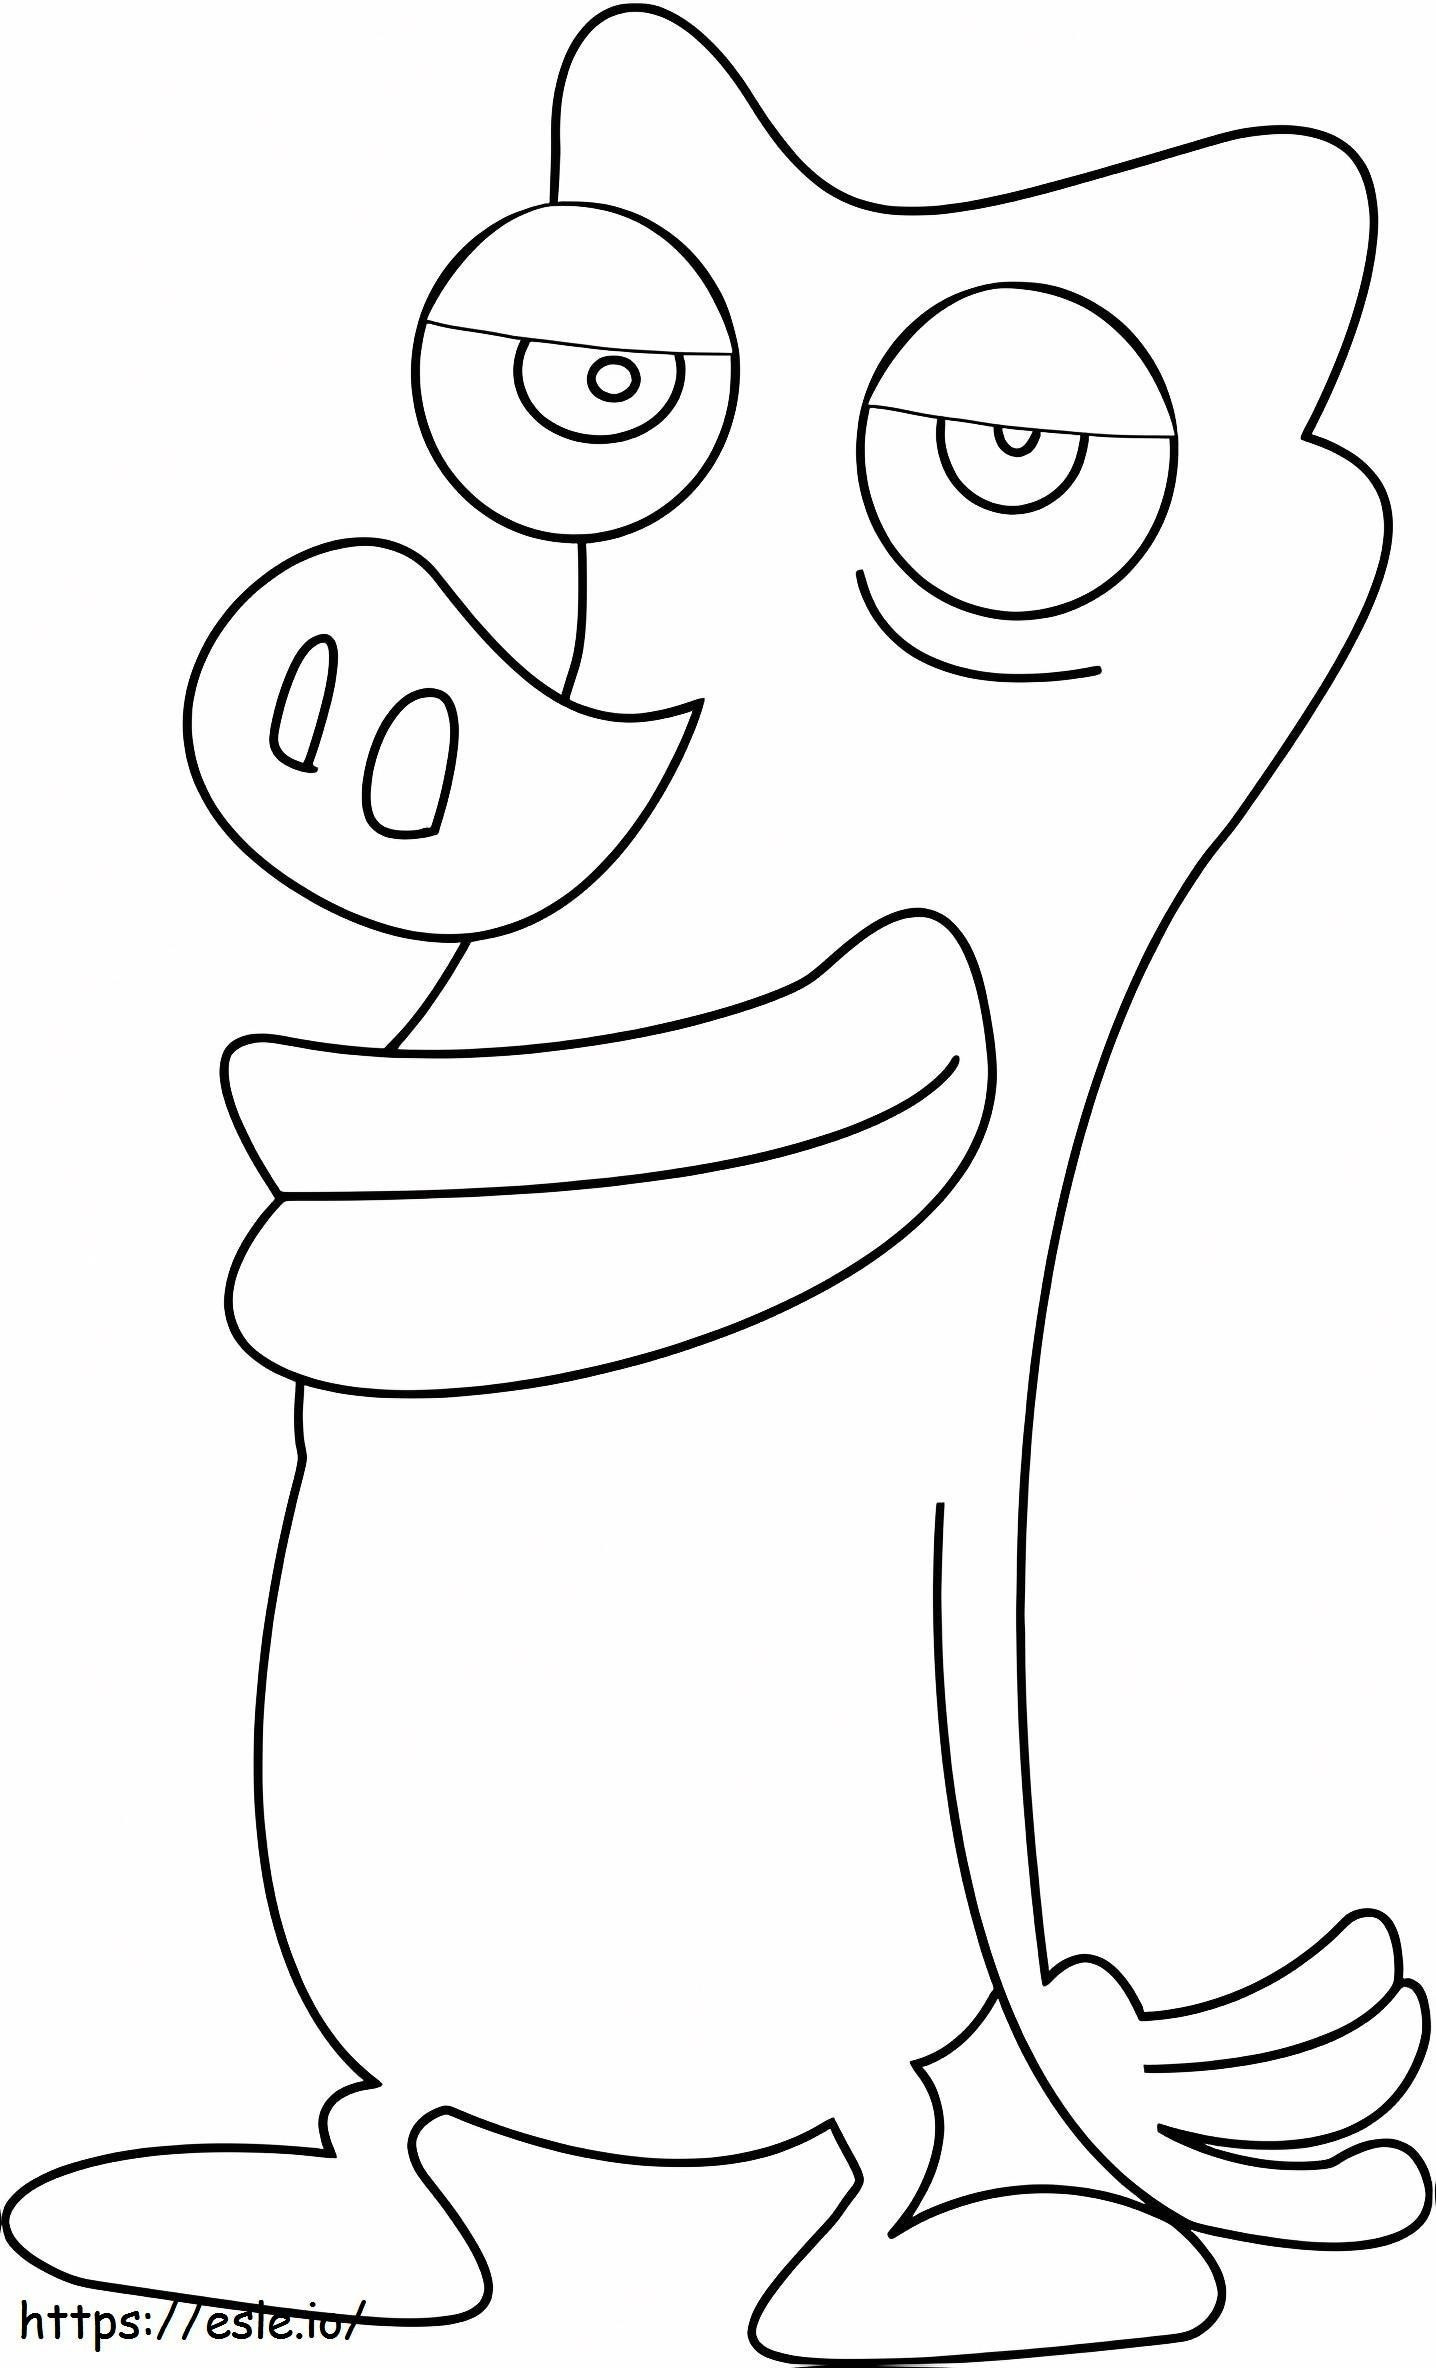 Smiling Ethno Polino coloring page